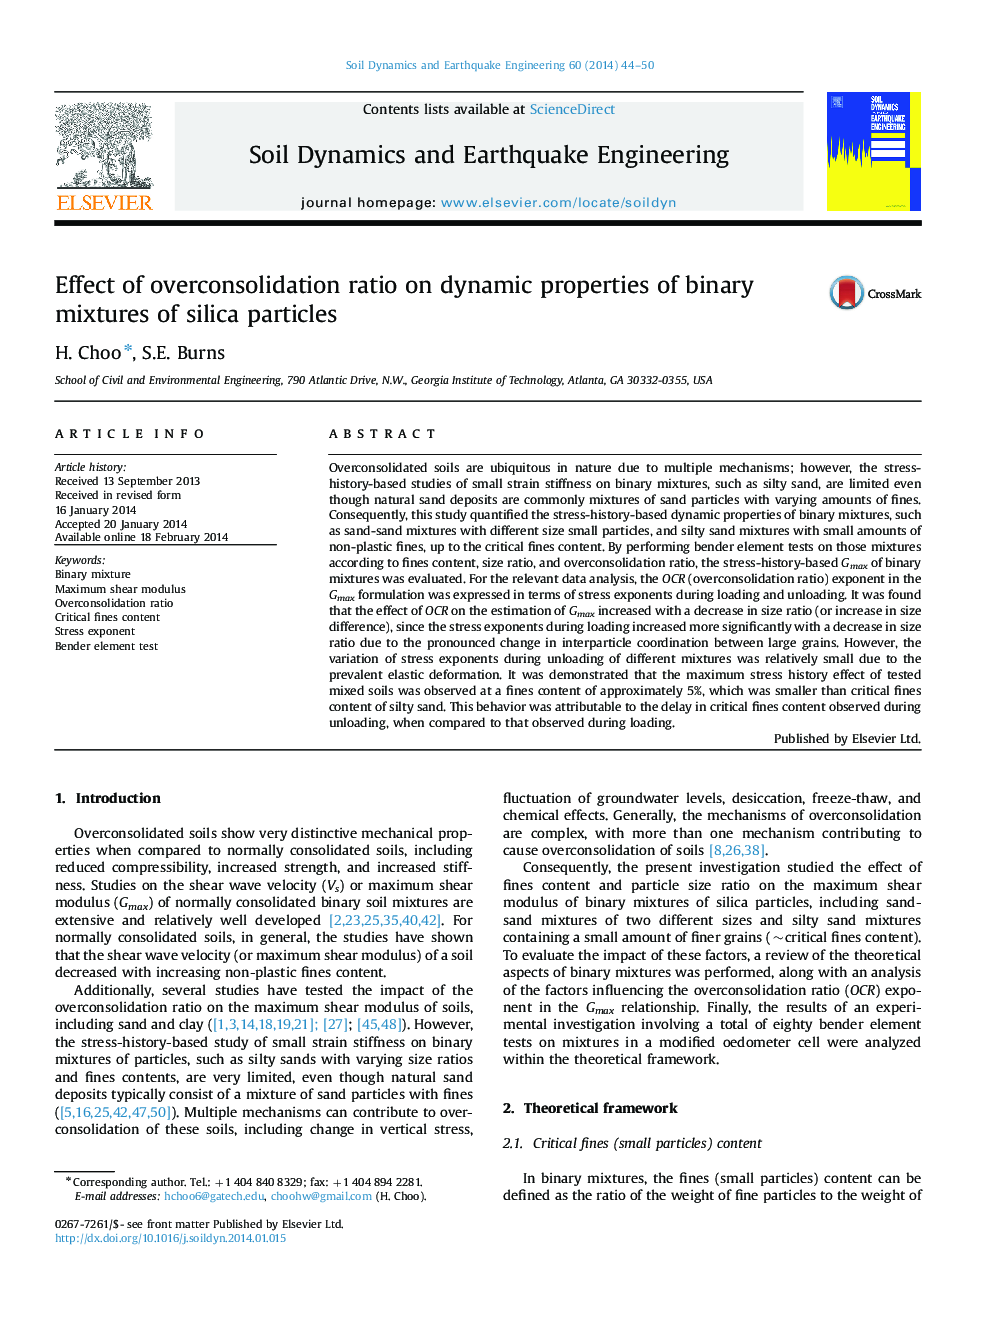 Effect of overconsolidation ratio on dynamic properties of binary mixtures of silica particles